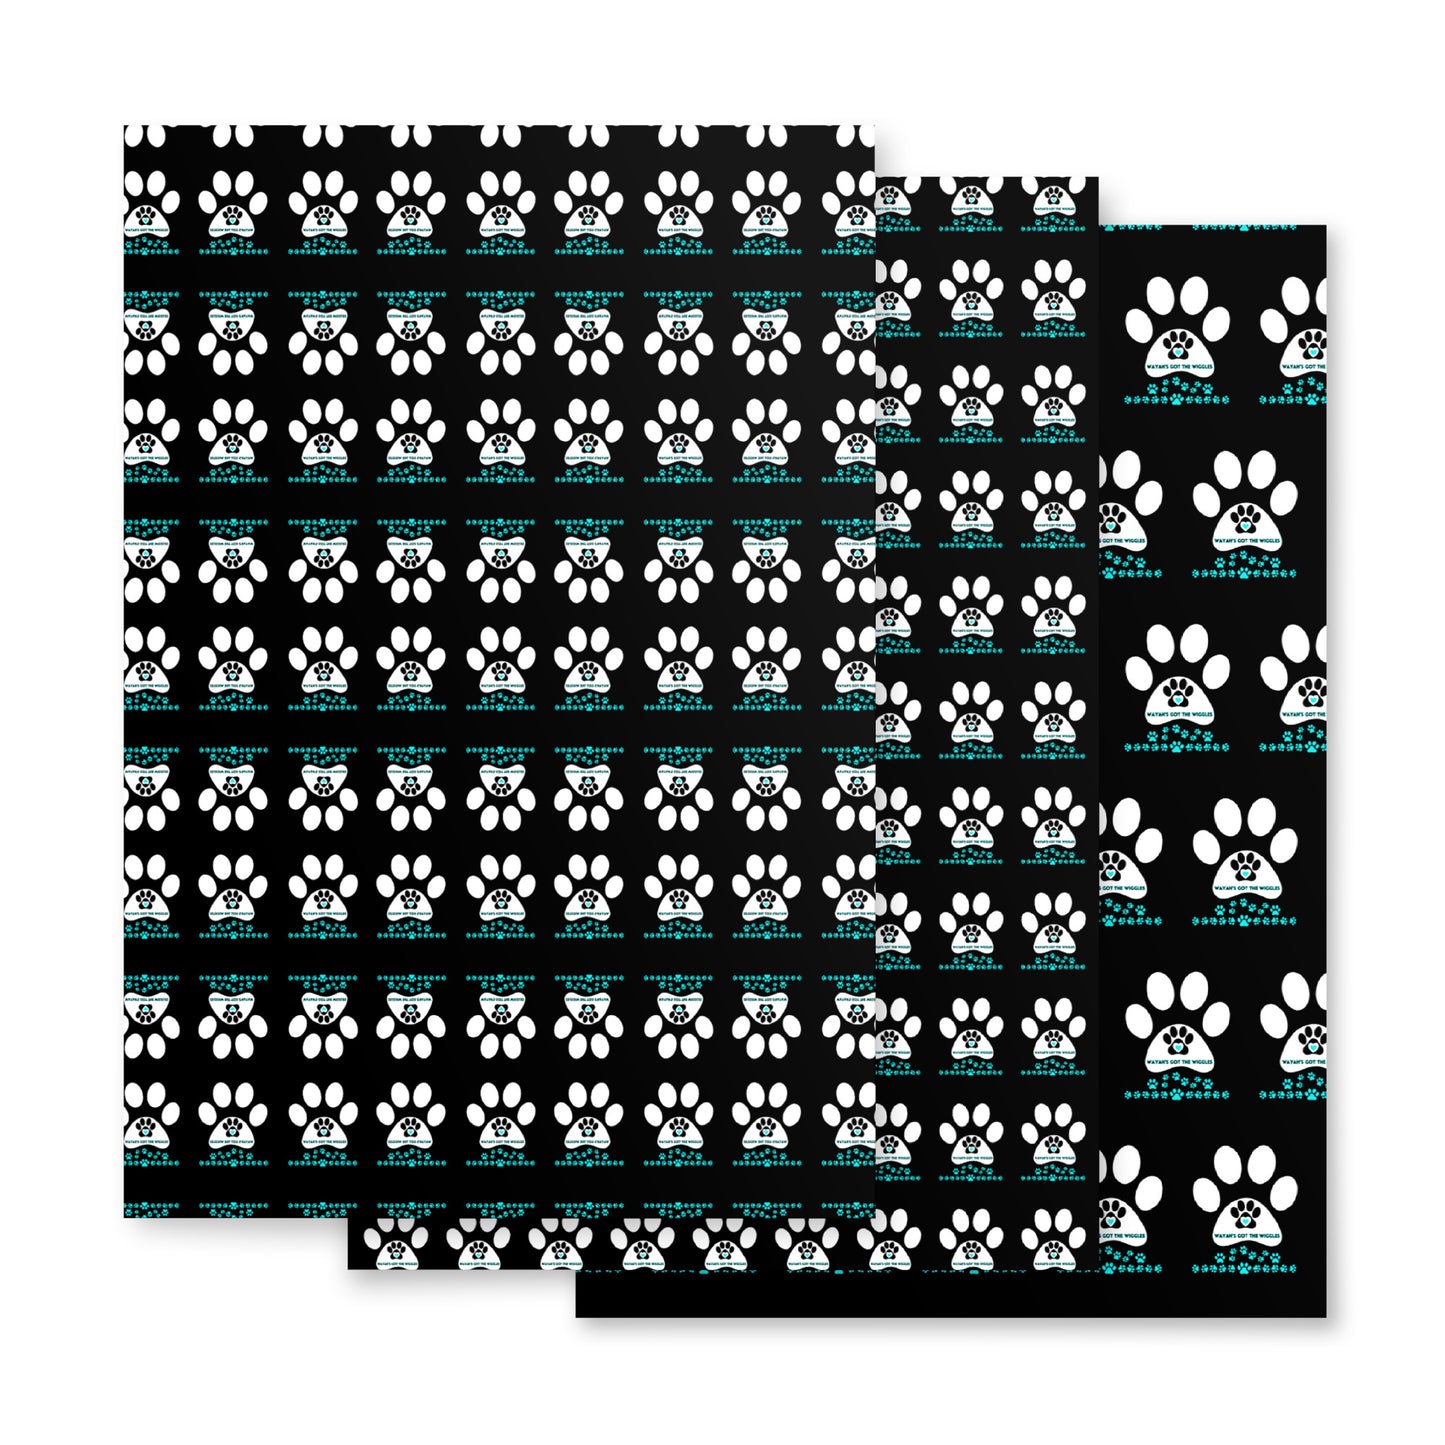 Paw Print- Wrapping paper sheets